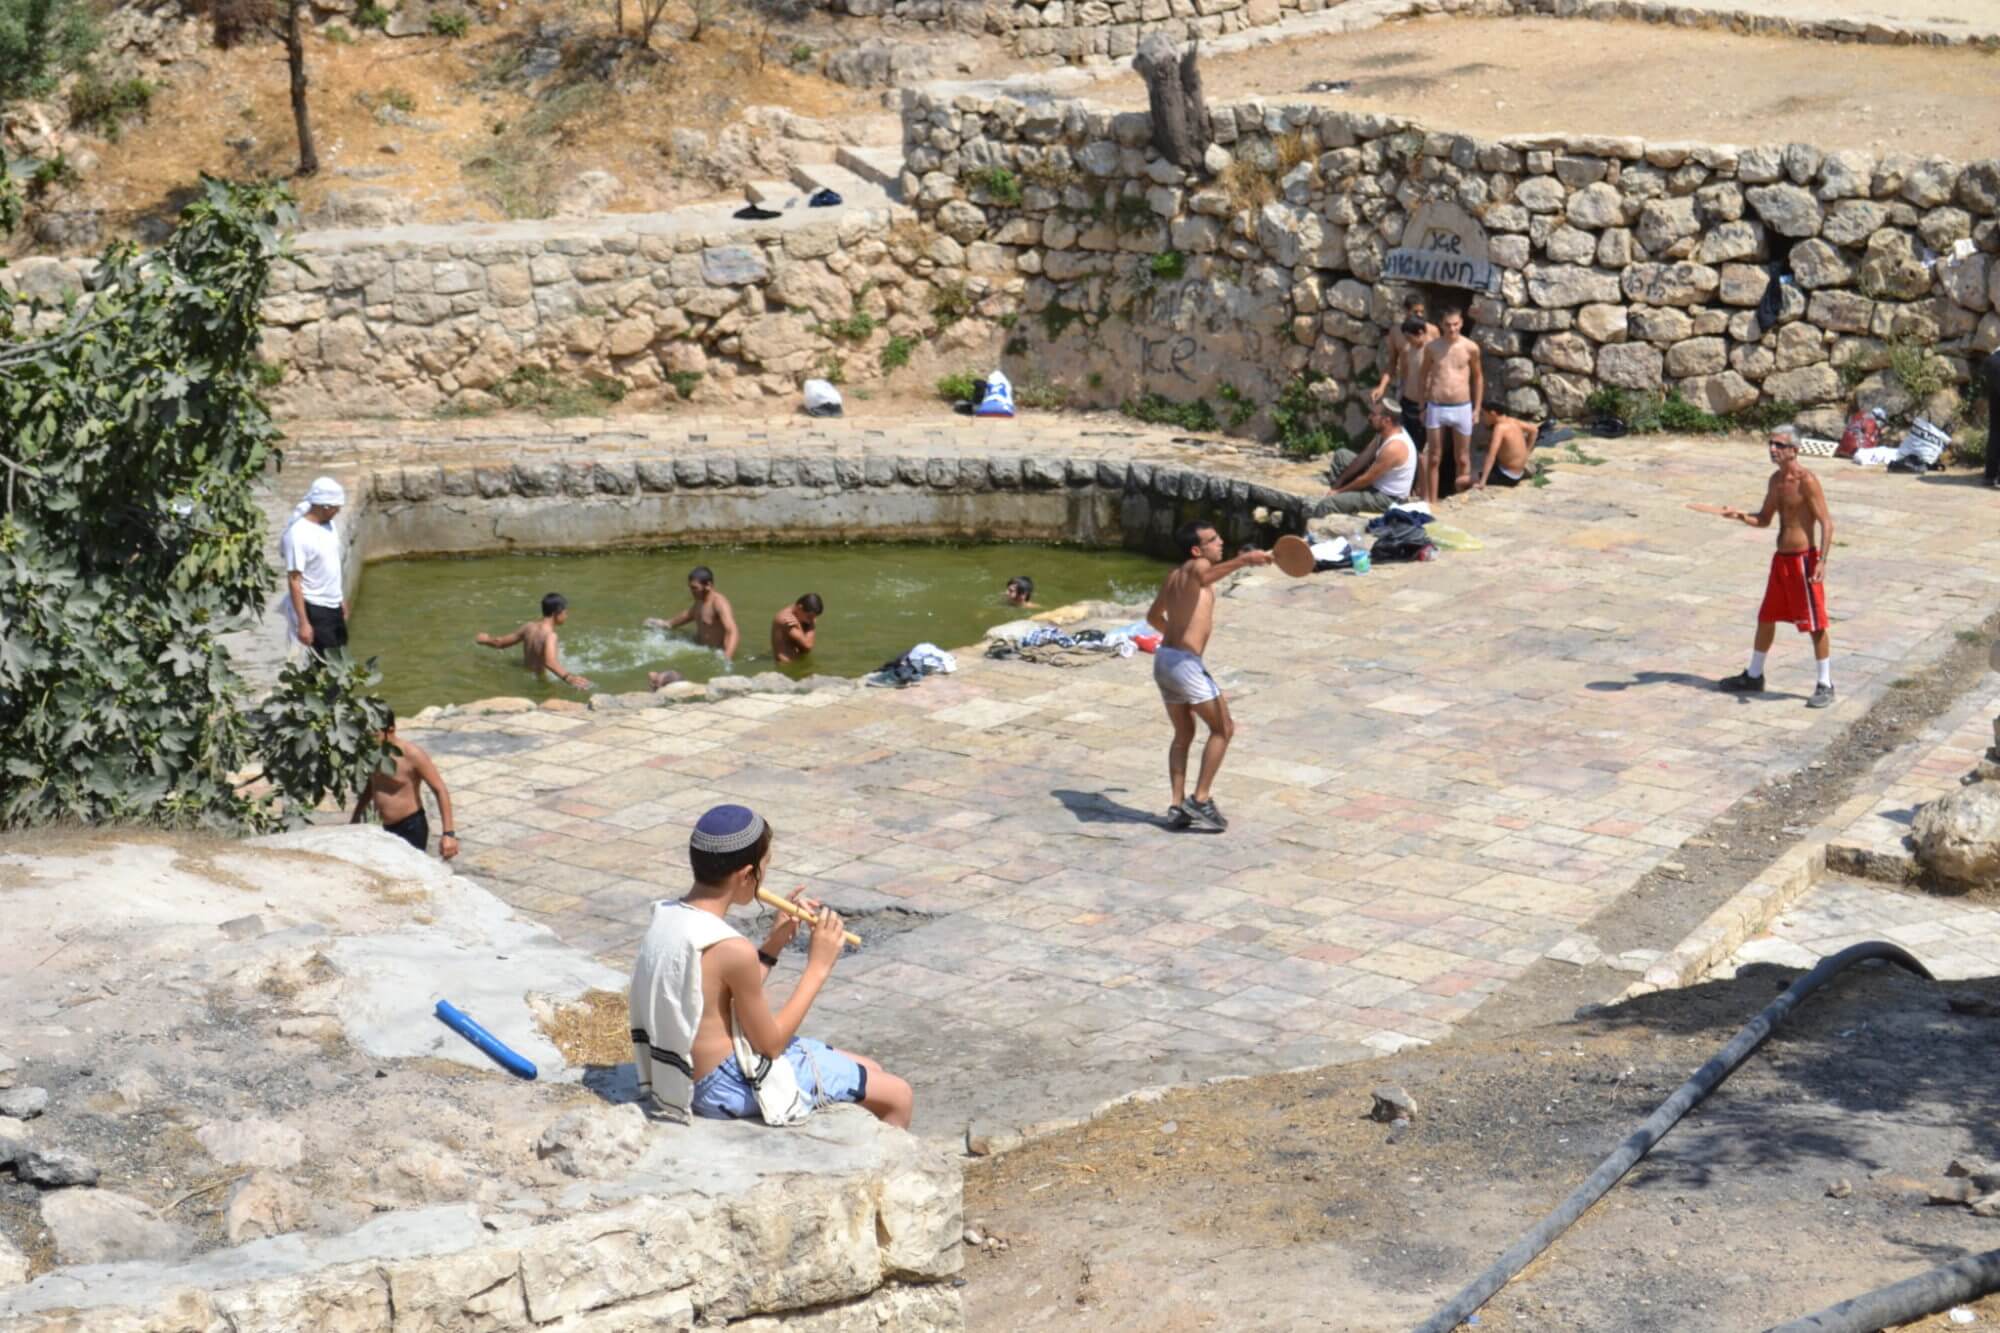 On the edge of downtown Jerusalem, among the ruins of the Palestinian village Lifta, Israeli Jews enjoy natural spring waters that once were central to the life of the village